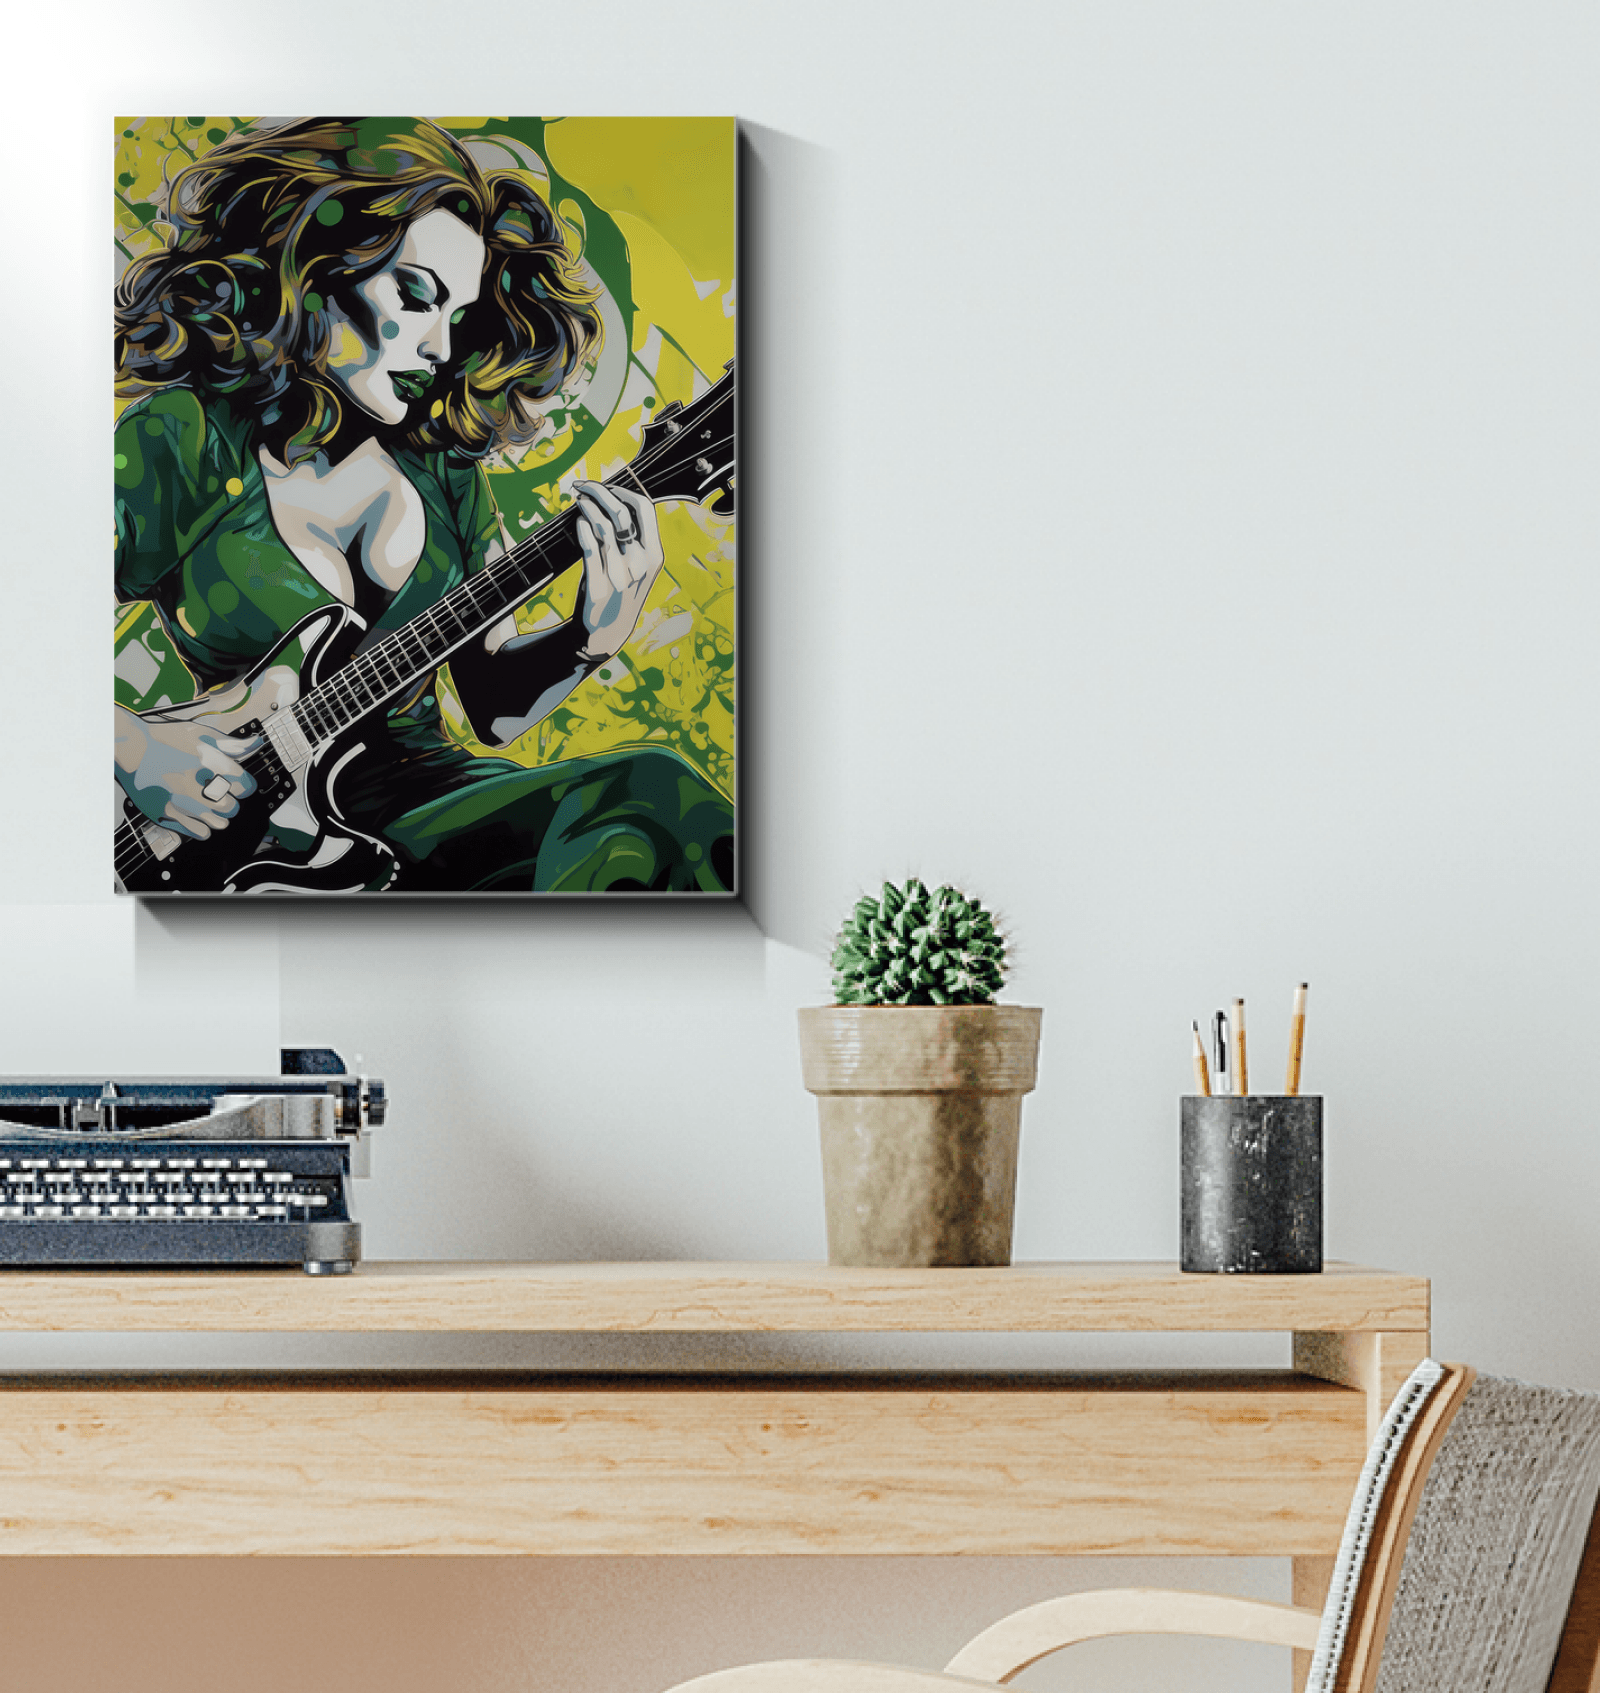 decorative-wall-art-for-music-room